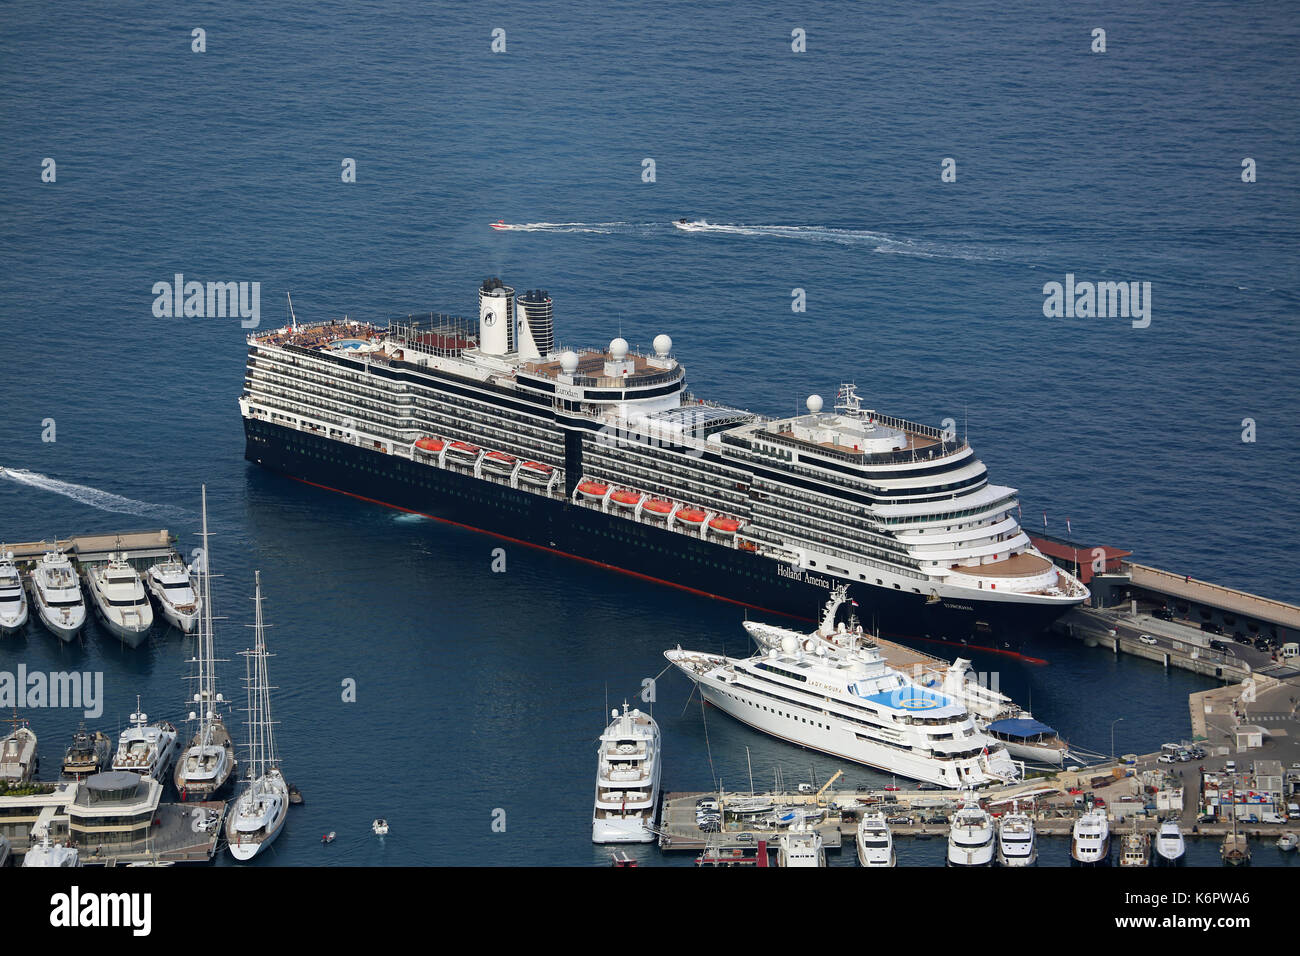 Monte-Carlo, Monaco - June 1, 2016: Aerial View of MS Eurodam Signature Cruise Ship (Holland America Line) and others Luxury Yachts in Port Hercule in Stock Photo